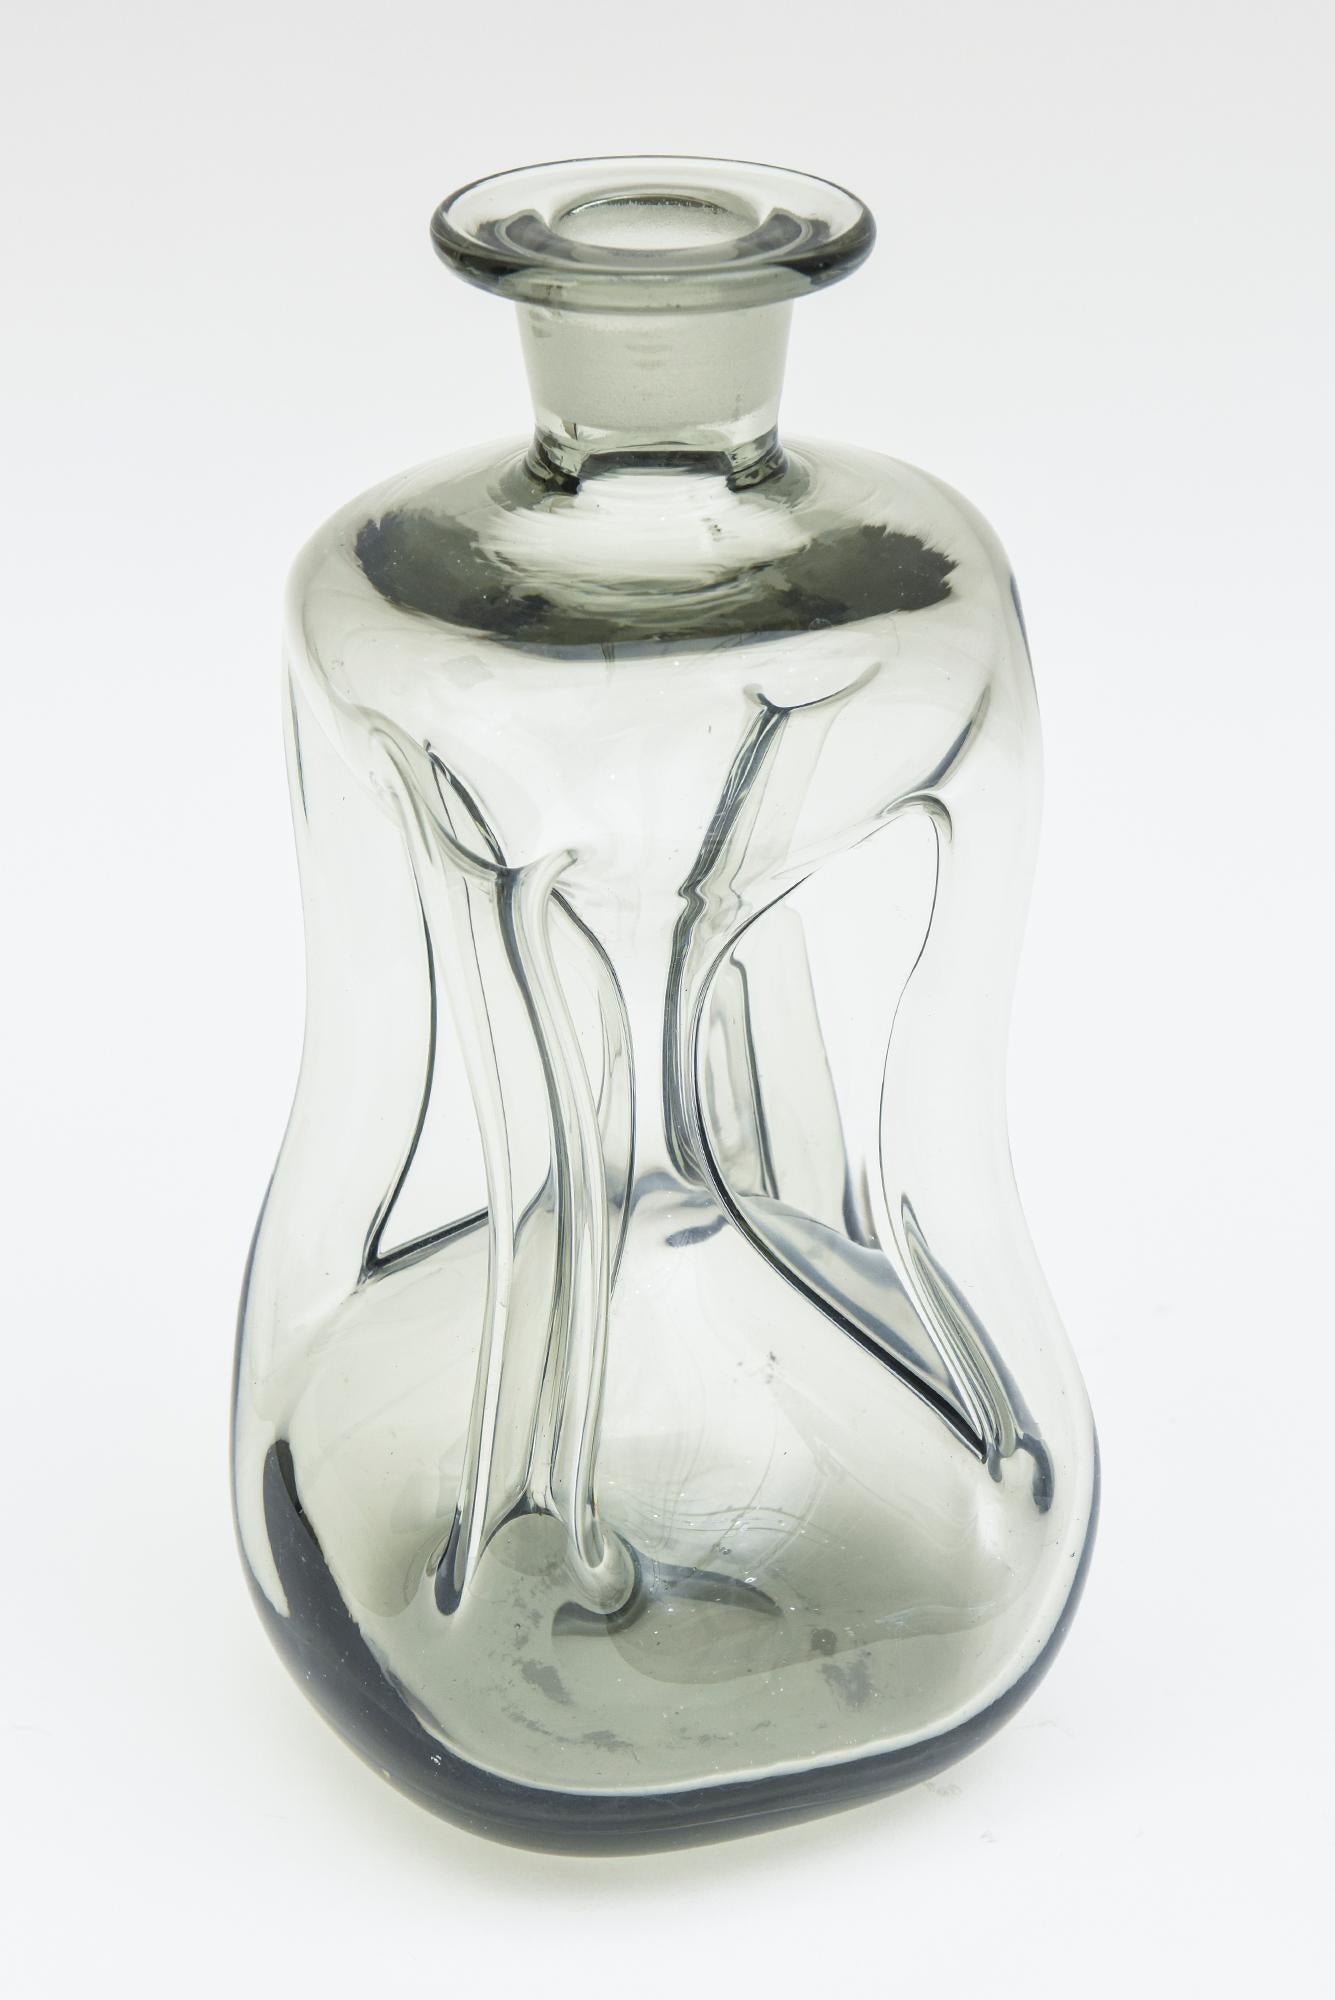 Smokey Gray Holmegaard Glass Cinched Decanter Bottle Rare Crown Stopper Vintage For Sale 2